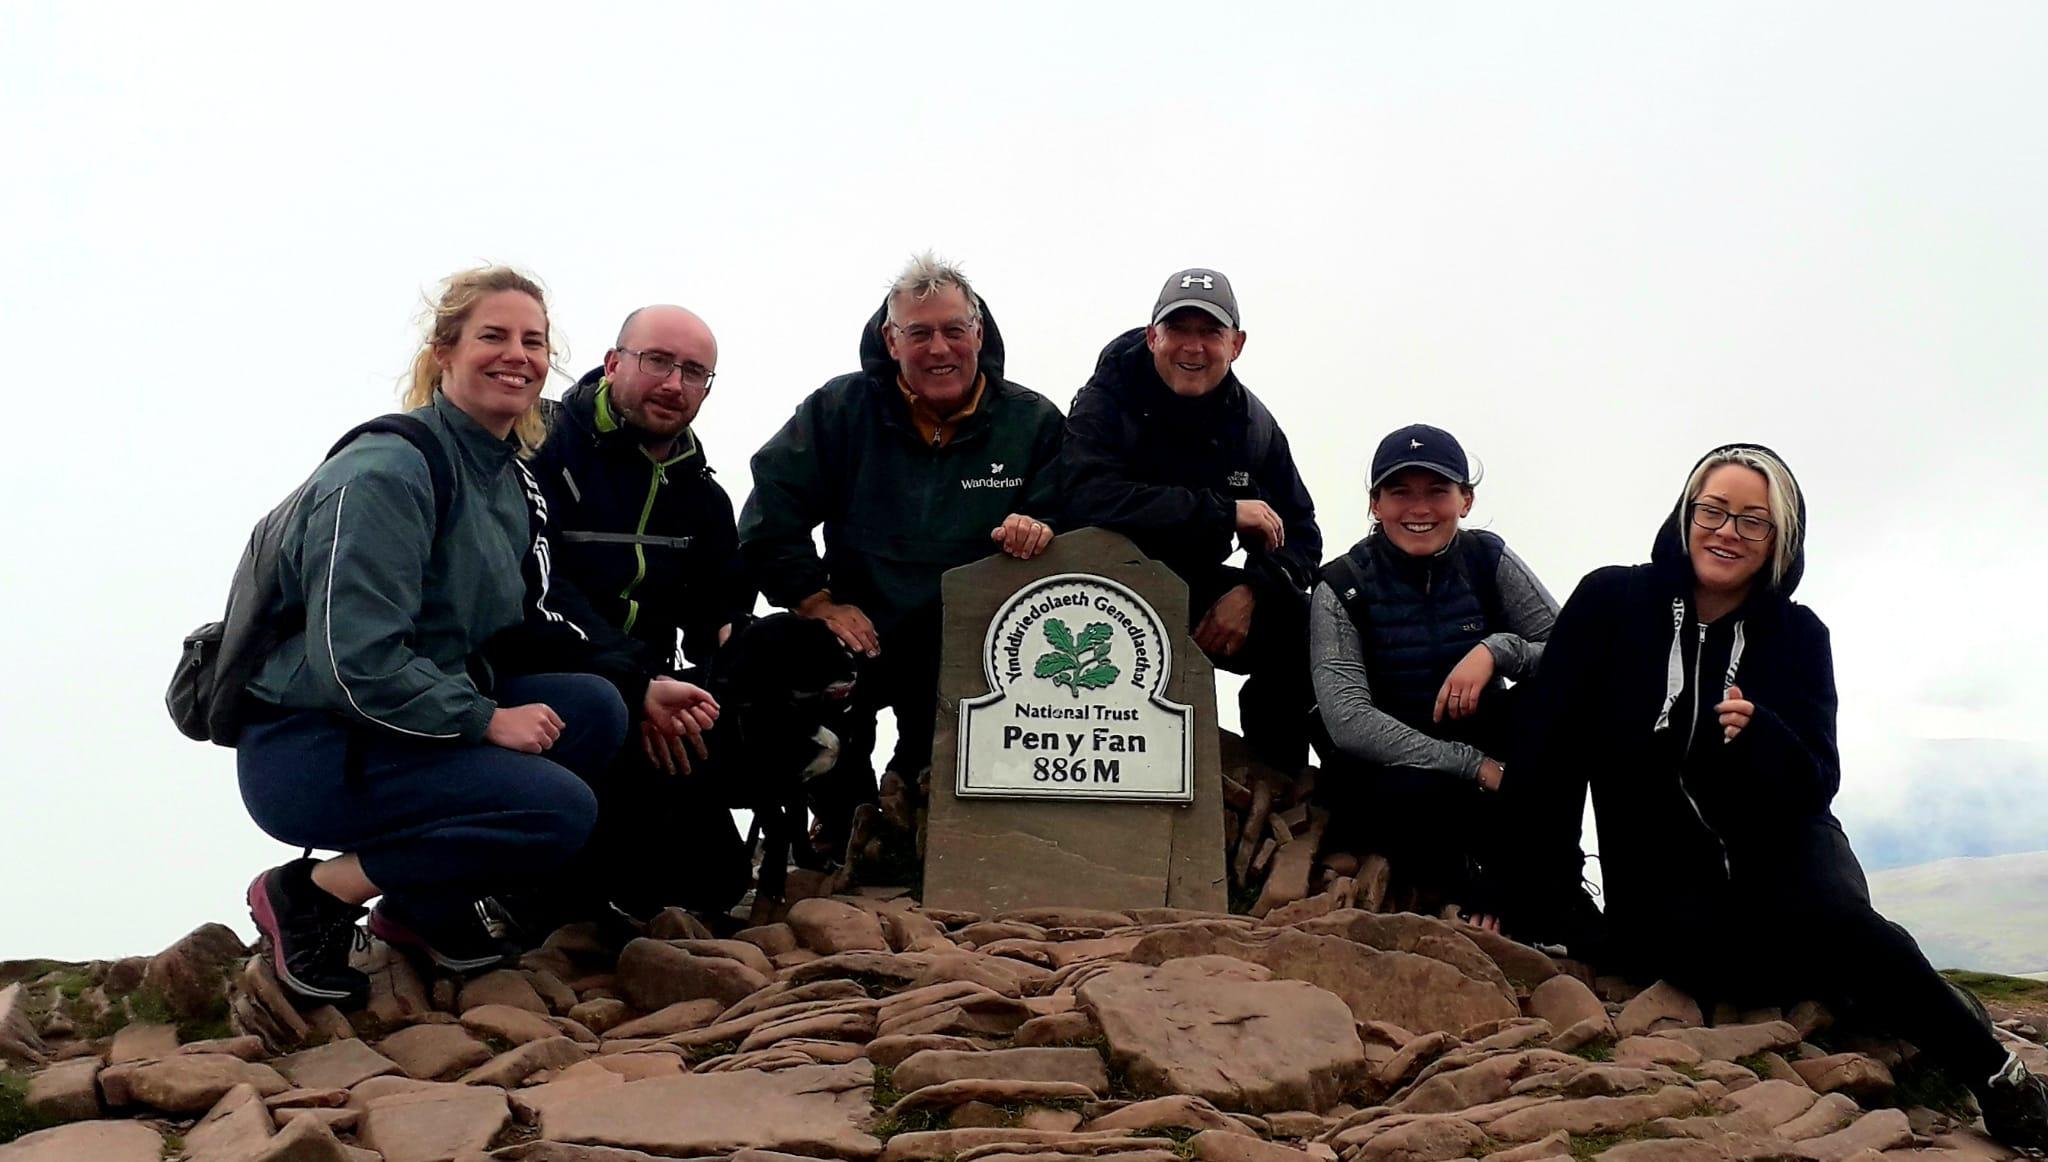 Move your Mind participants at summit of Pen Y Fan.